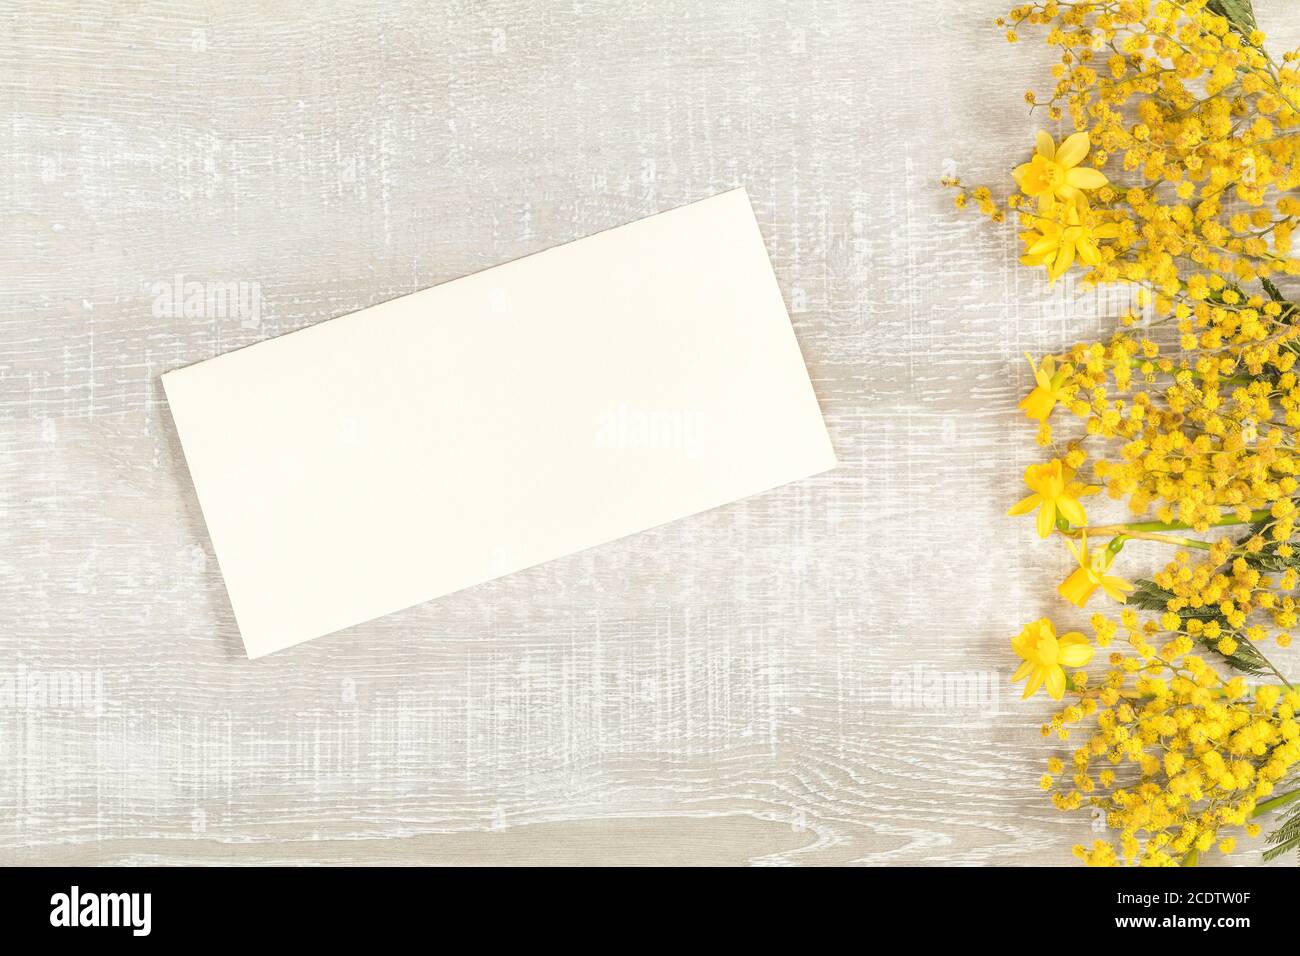 Mimosa and yellow daffodils on a light wooden surface Stock Photo